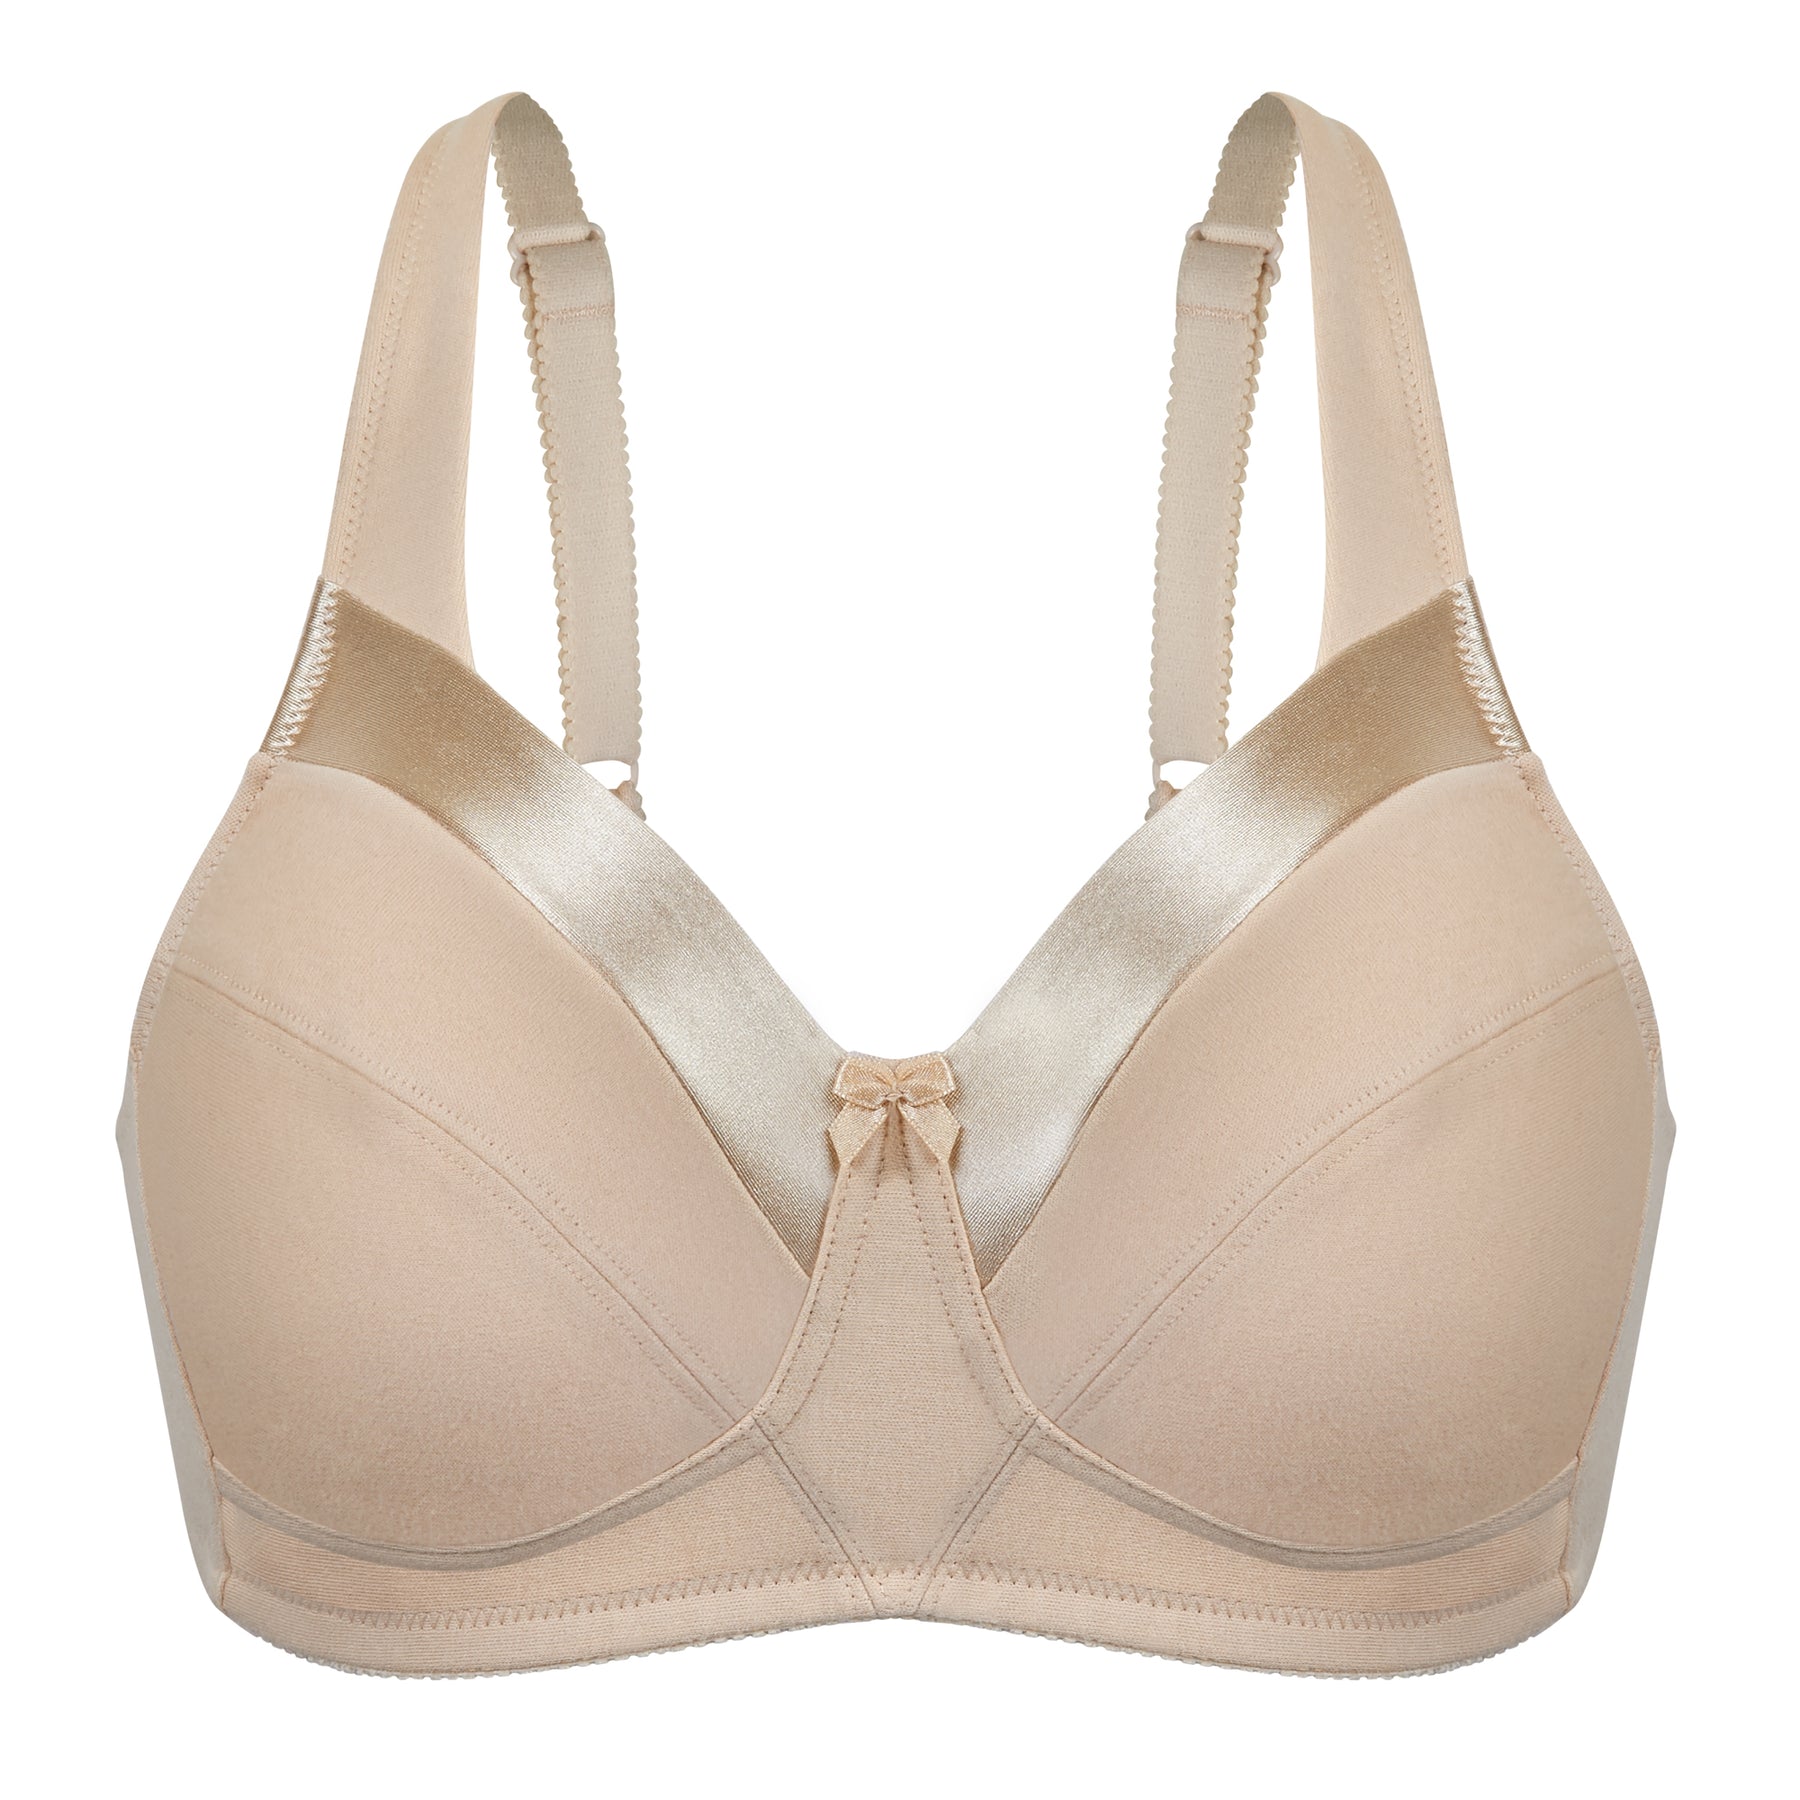 Buy Bralux B Cup Cotton Padded Bra for Womens Everyday Use, Mint